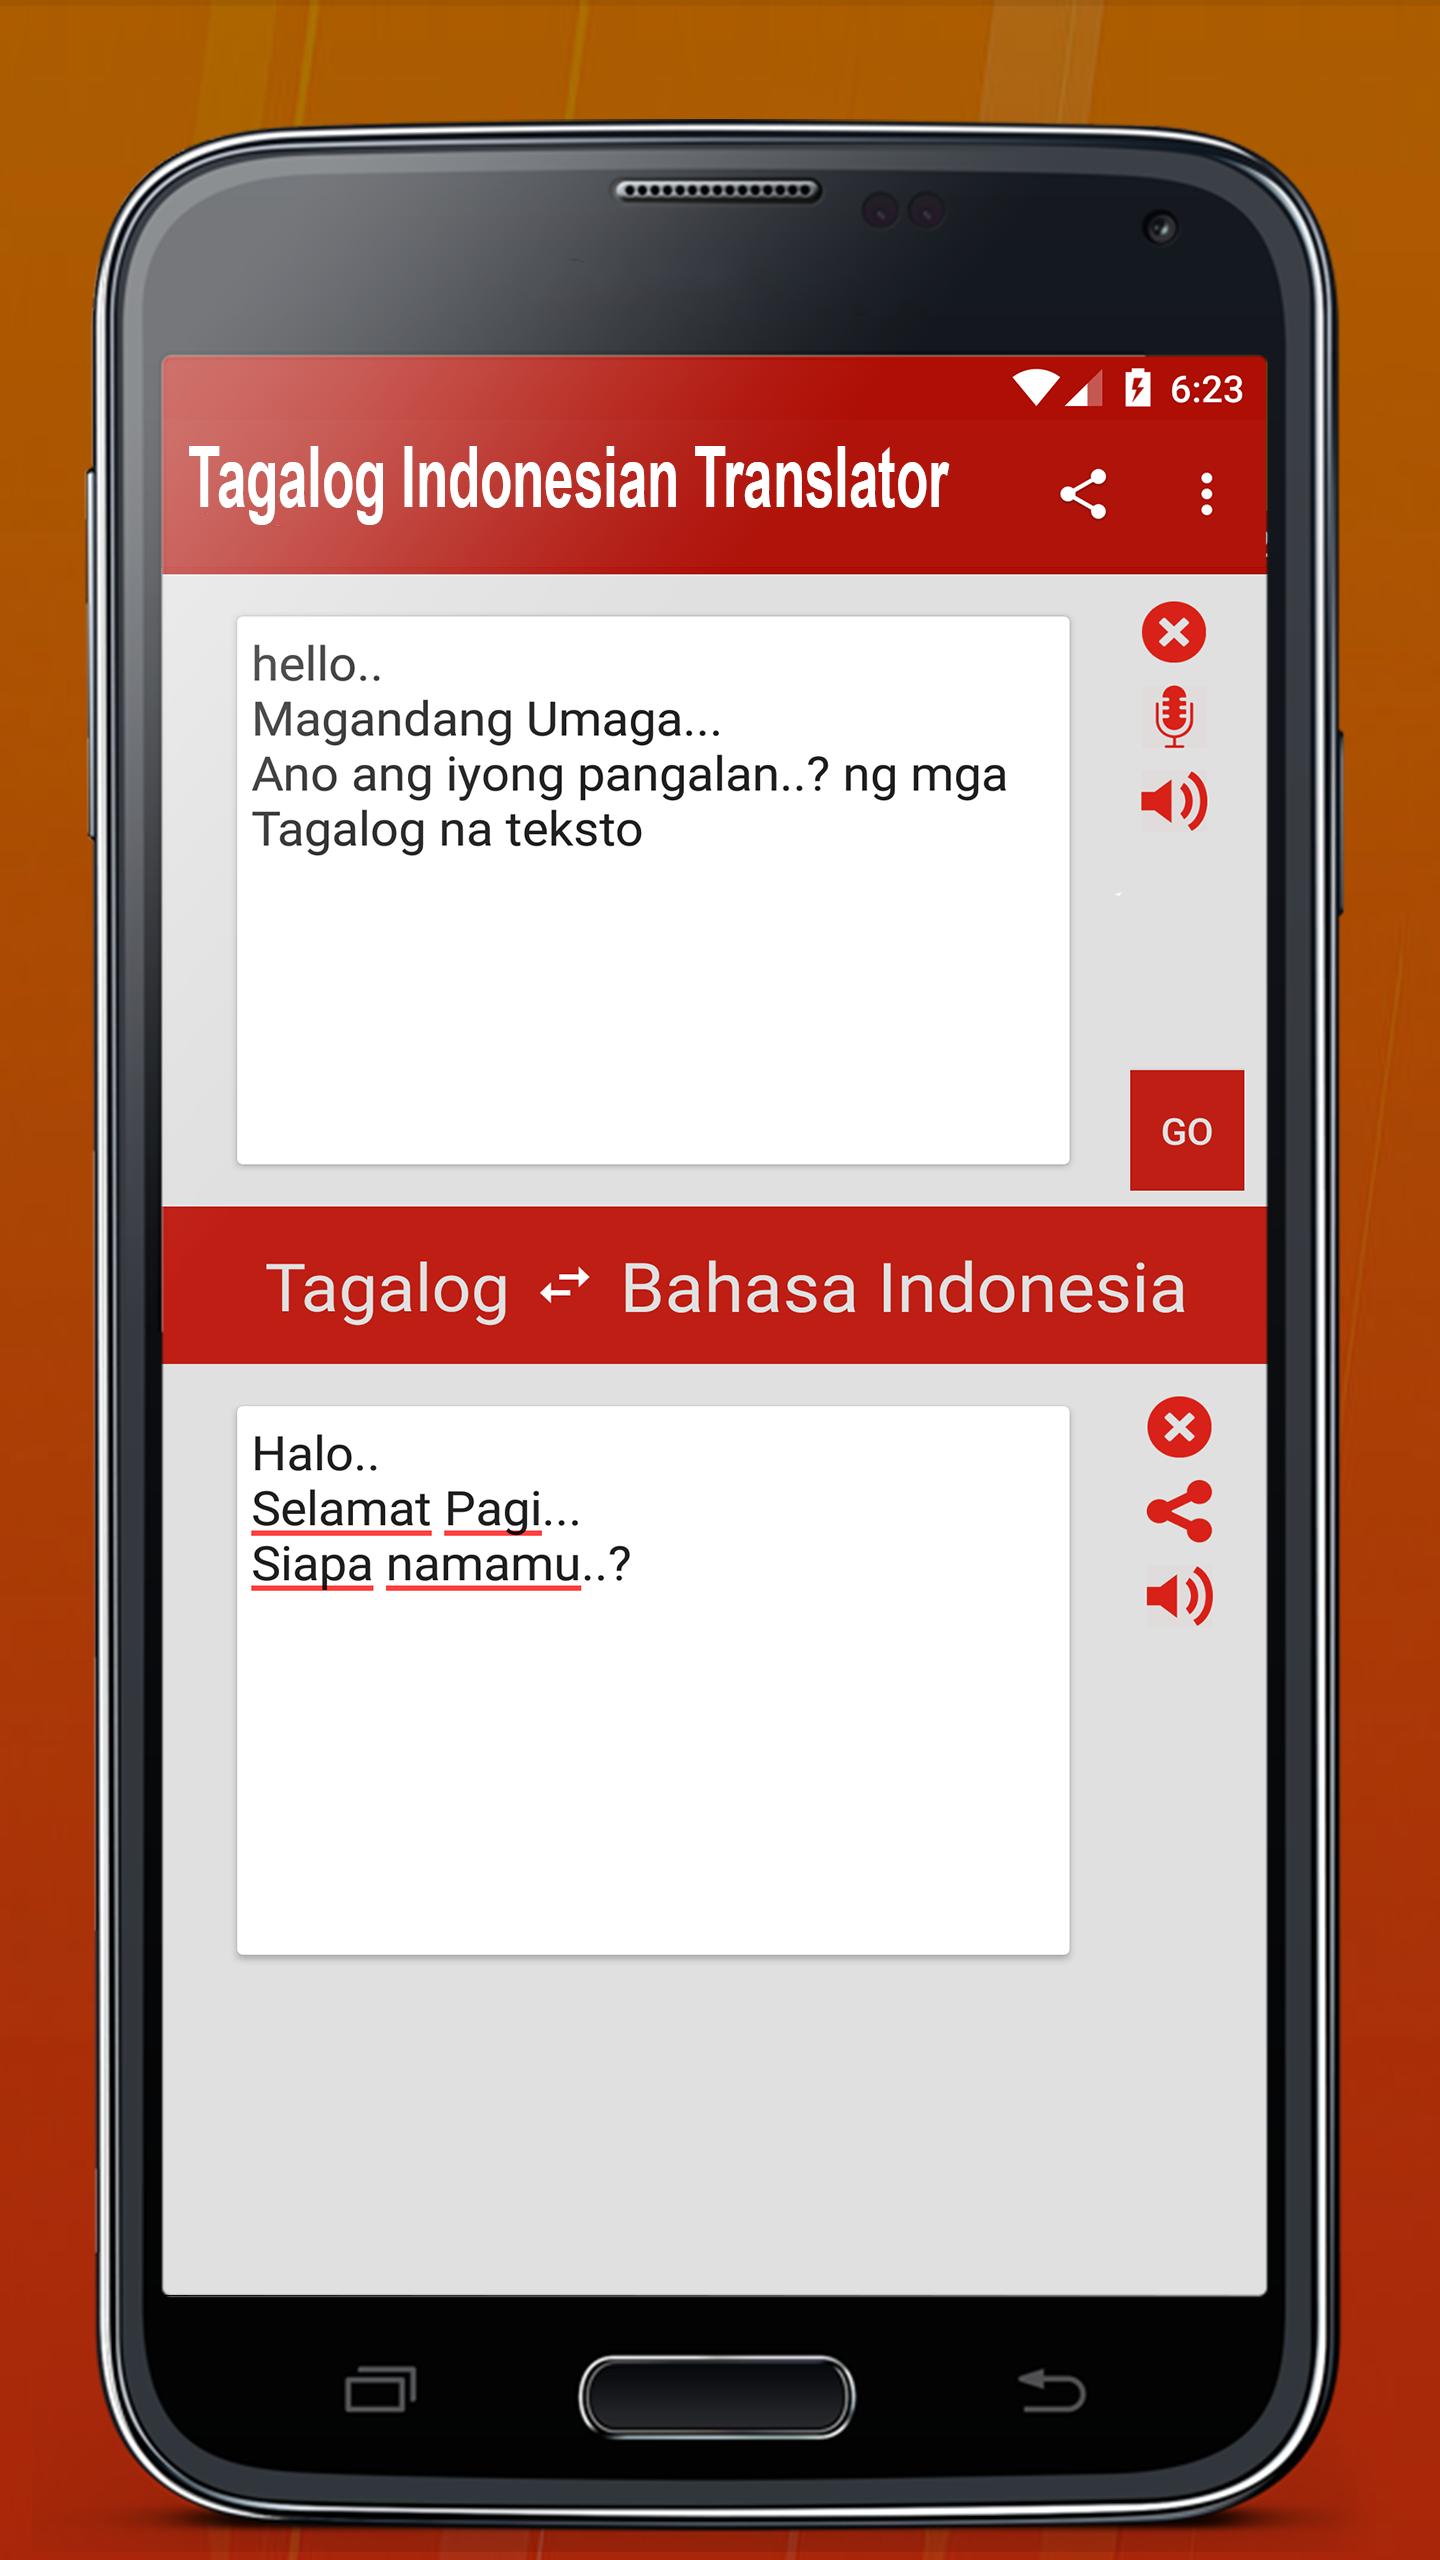 Tagalog Indonesian Translation for Android - APK Download